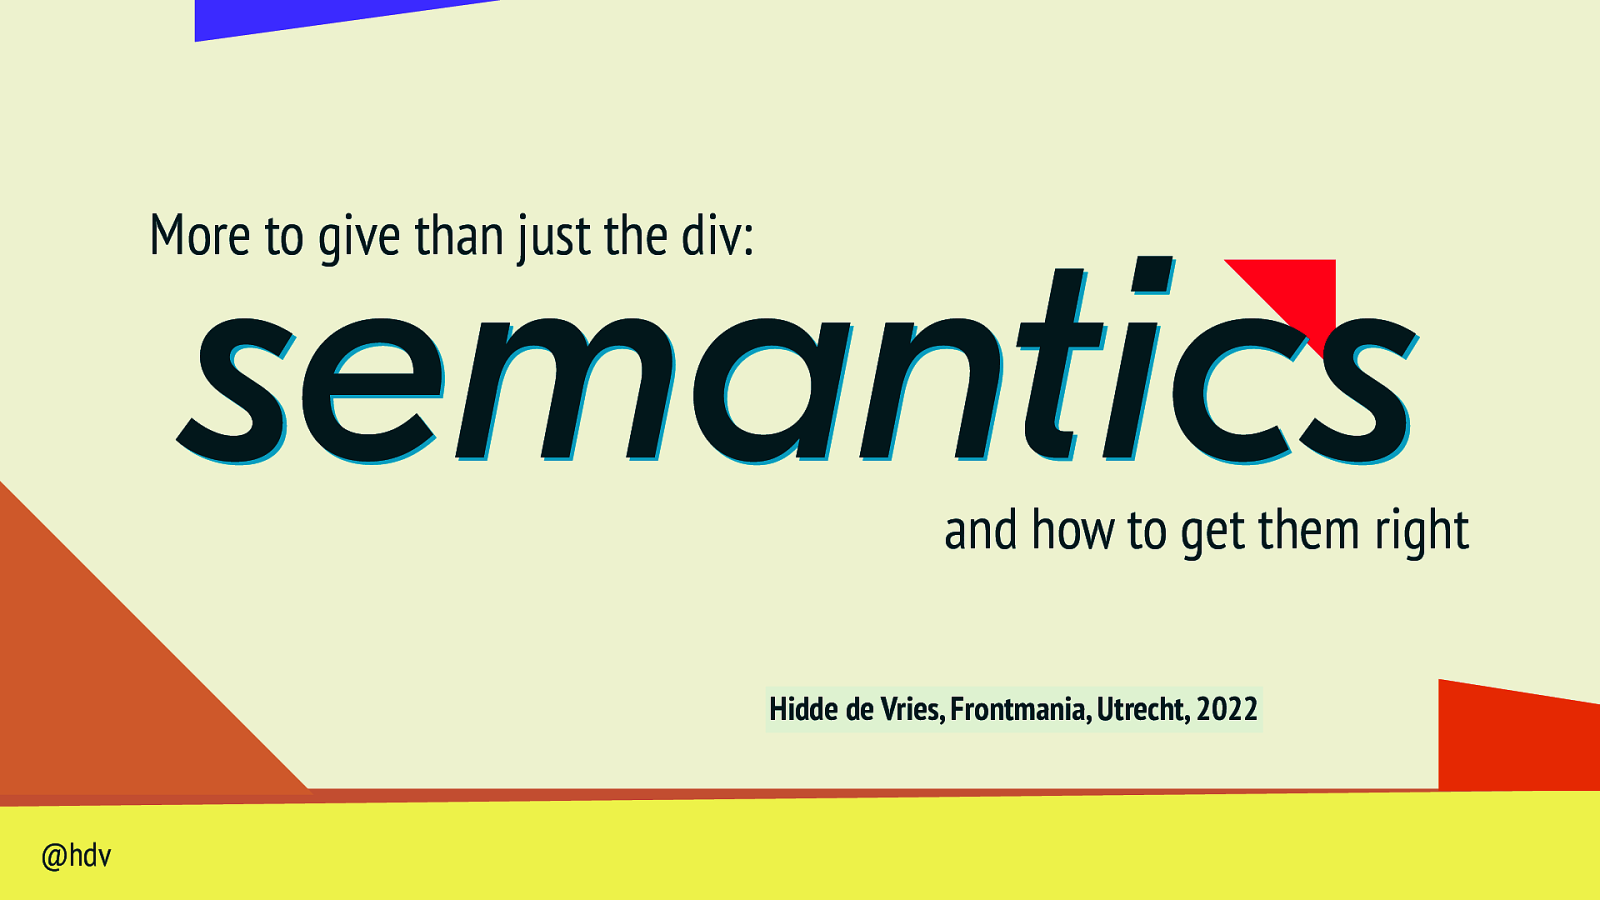 More to give than just the div: semantics and how to get them right